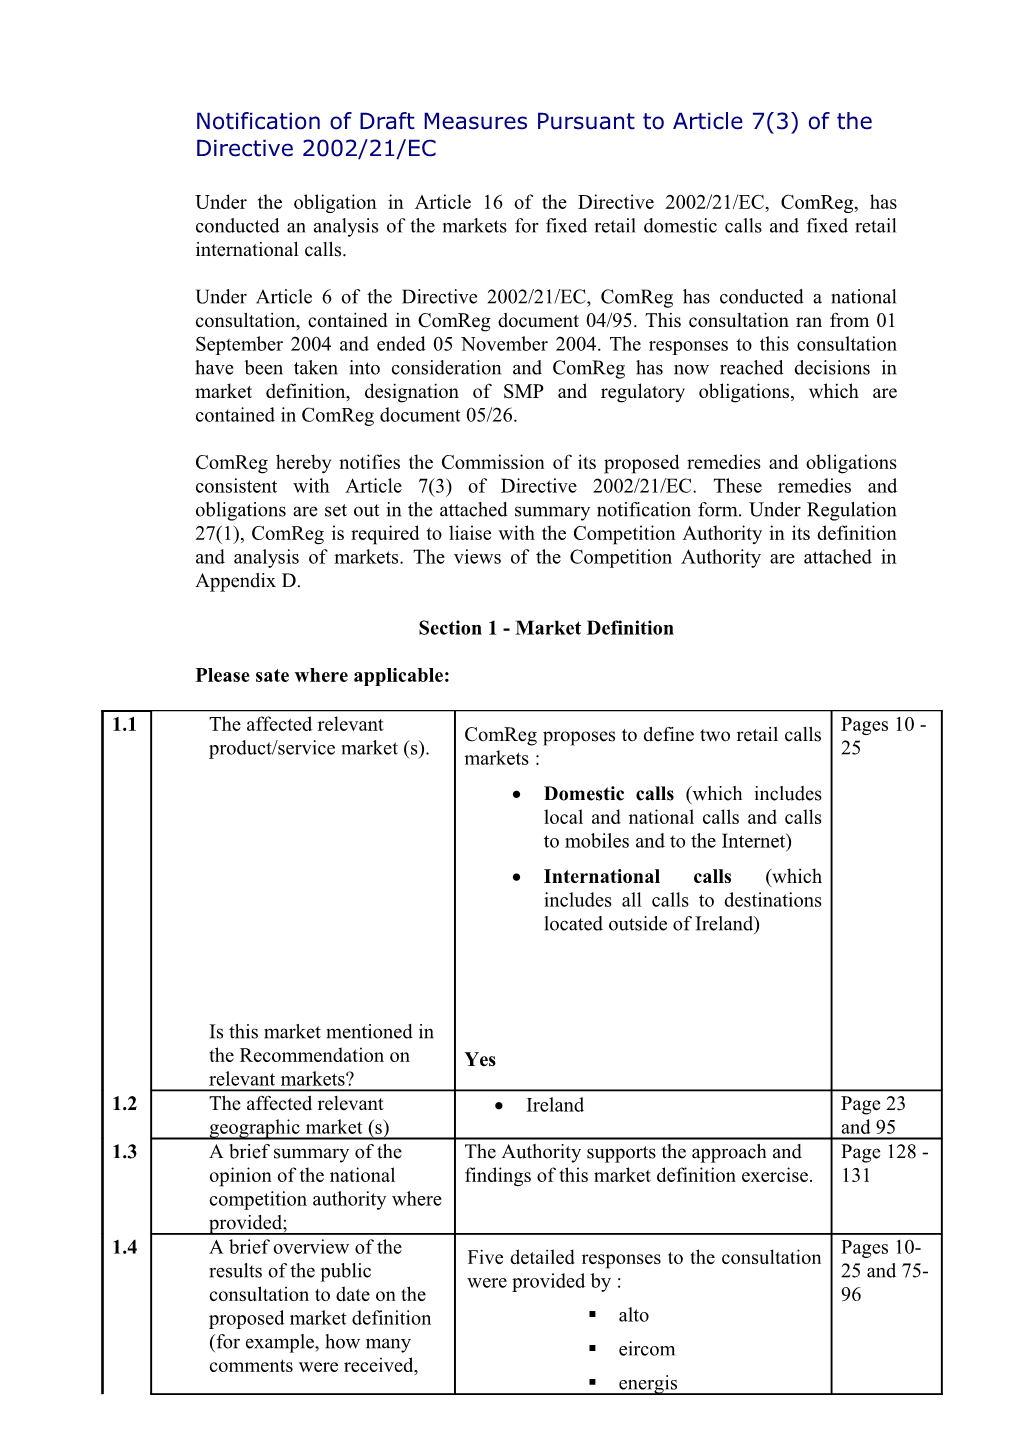 Appendix E Notification of Draft Measures Pursuant to Article 7(3) of the Directive 2002/21/EC